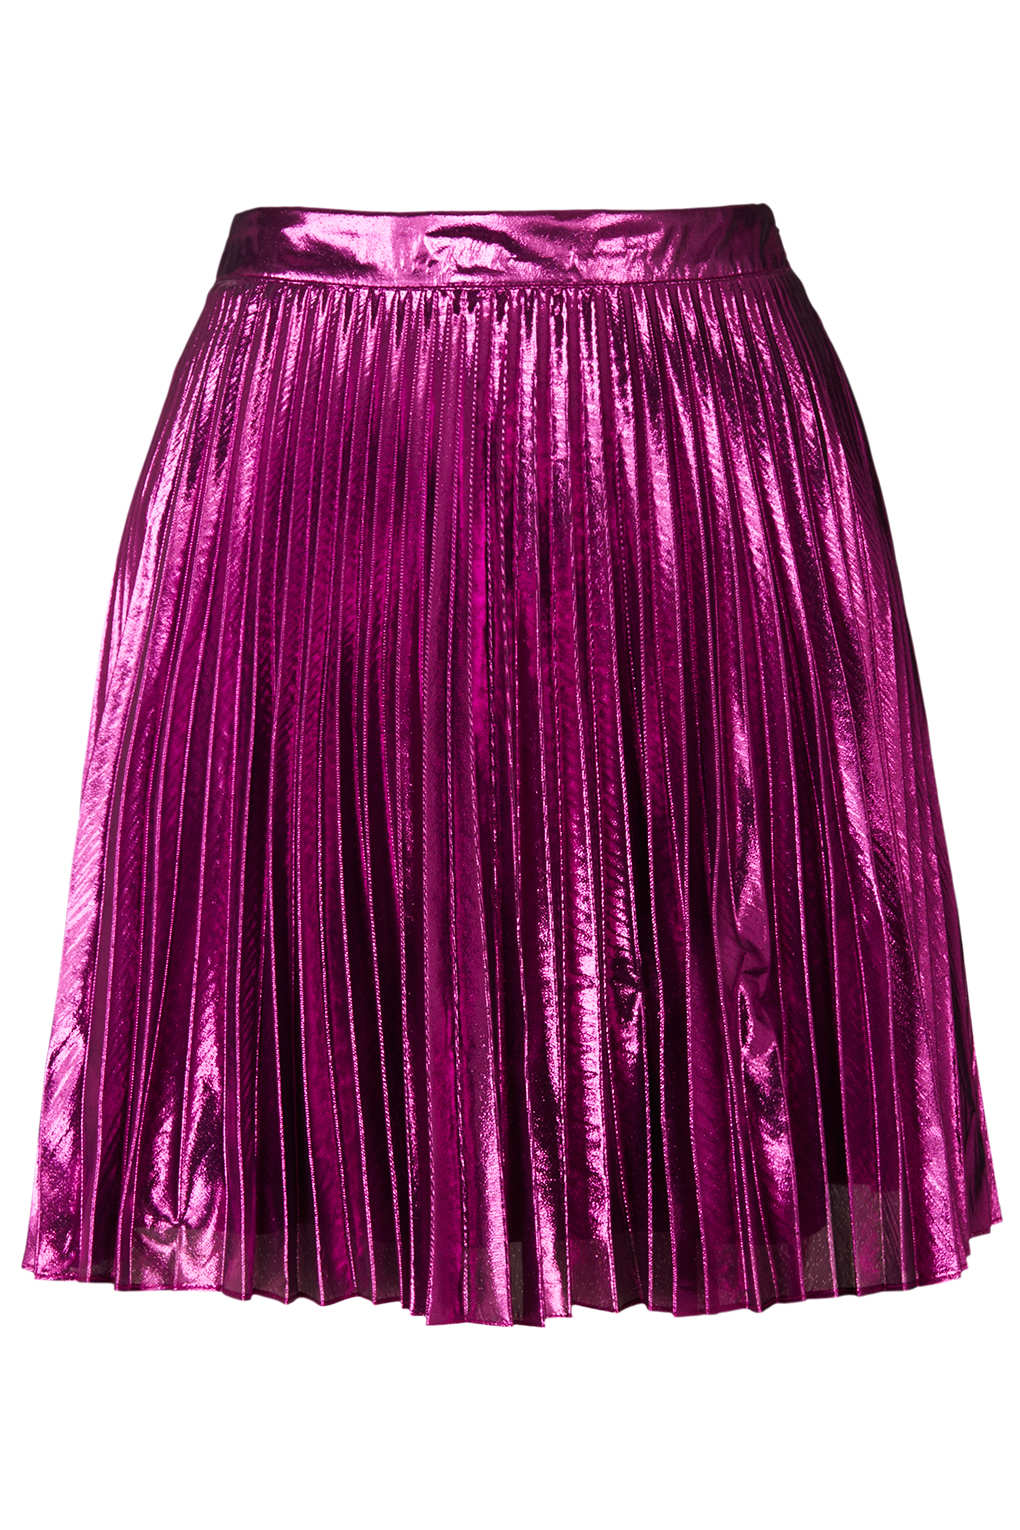 Topshop Metallic Pleated Mini Skirt By Lashes Edit in Purple (PINK) | Lyst